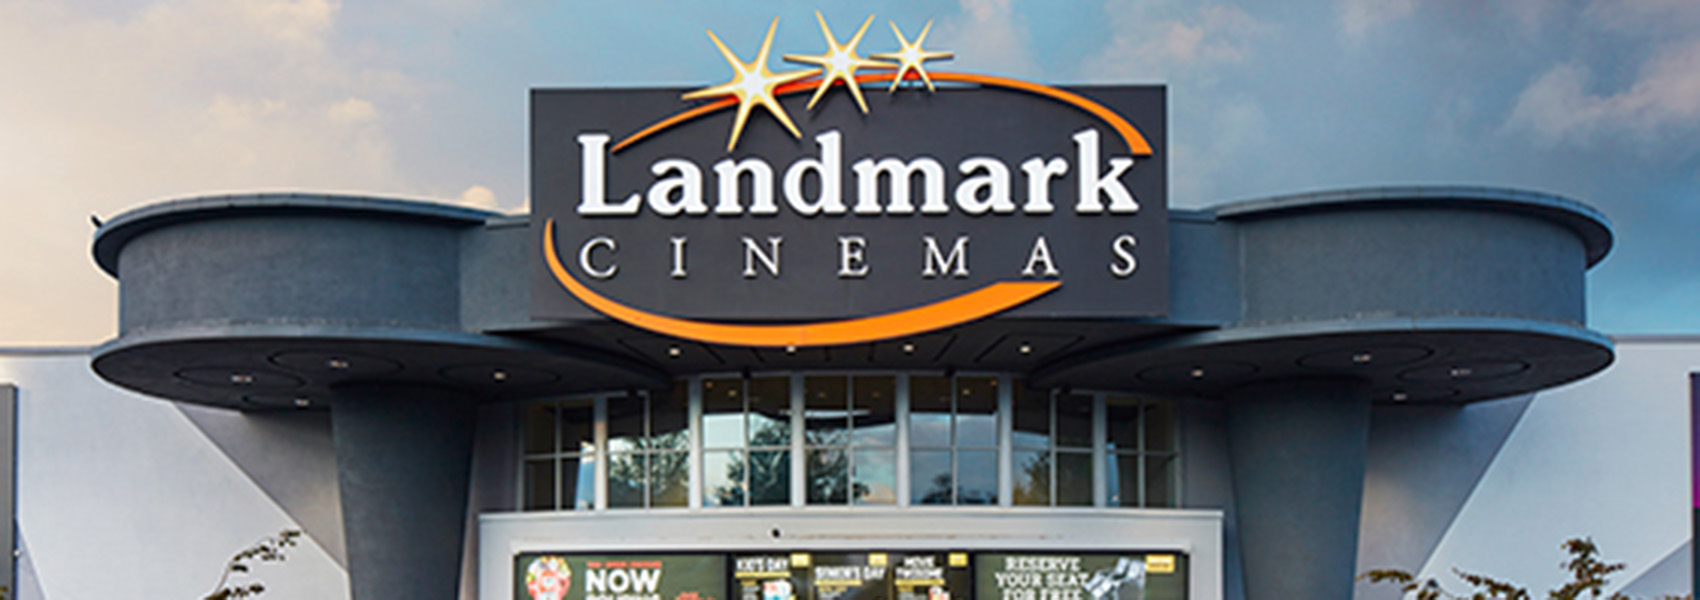 Landmark Cinemas sign on the outside of a theatre.